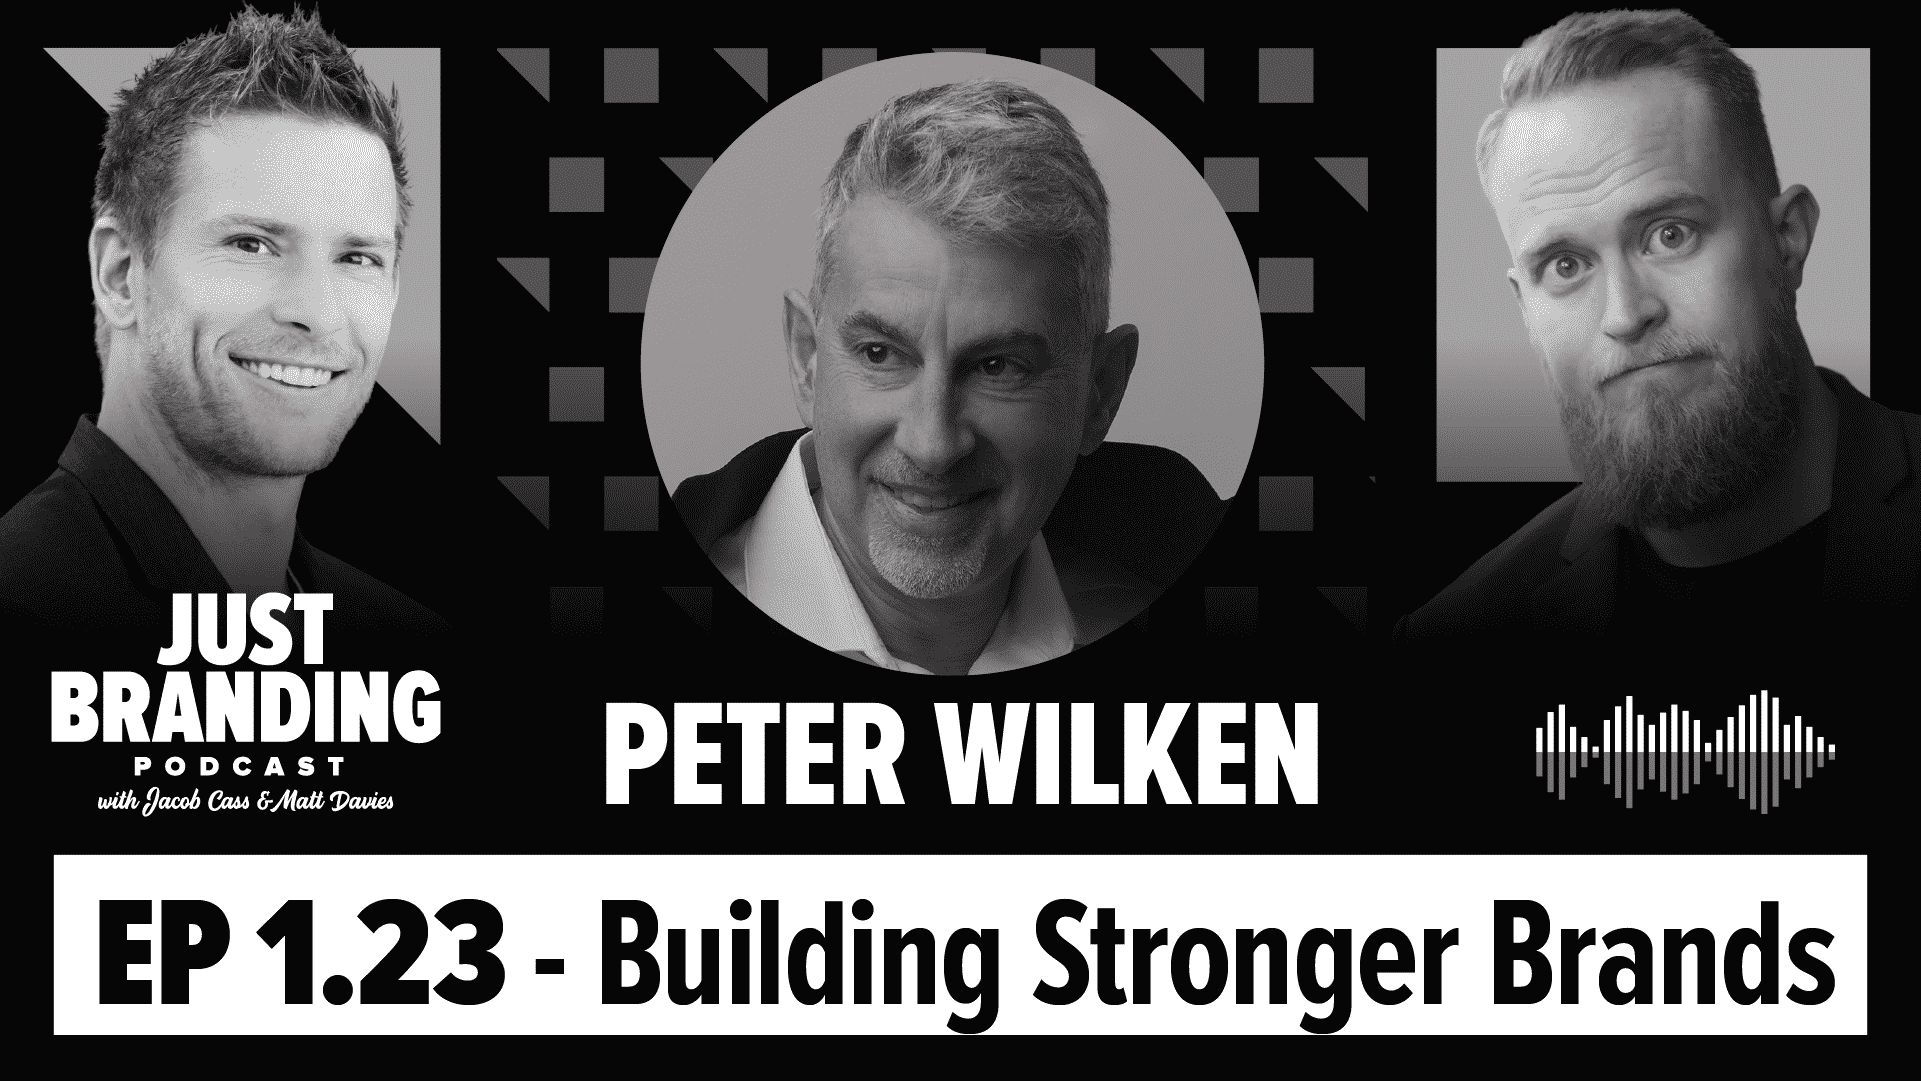 [Podcast] How to Build Stronger Brands with Peter Wilken